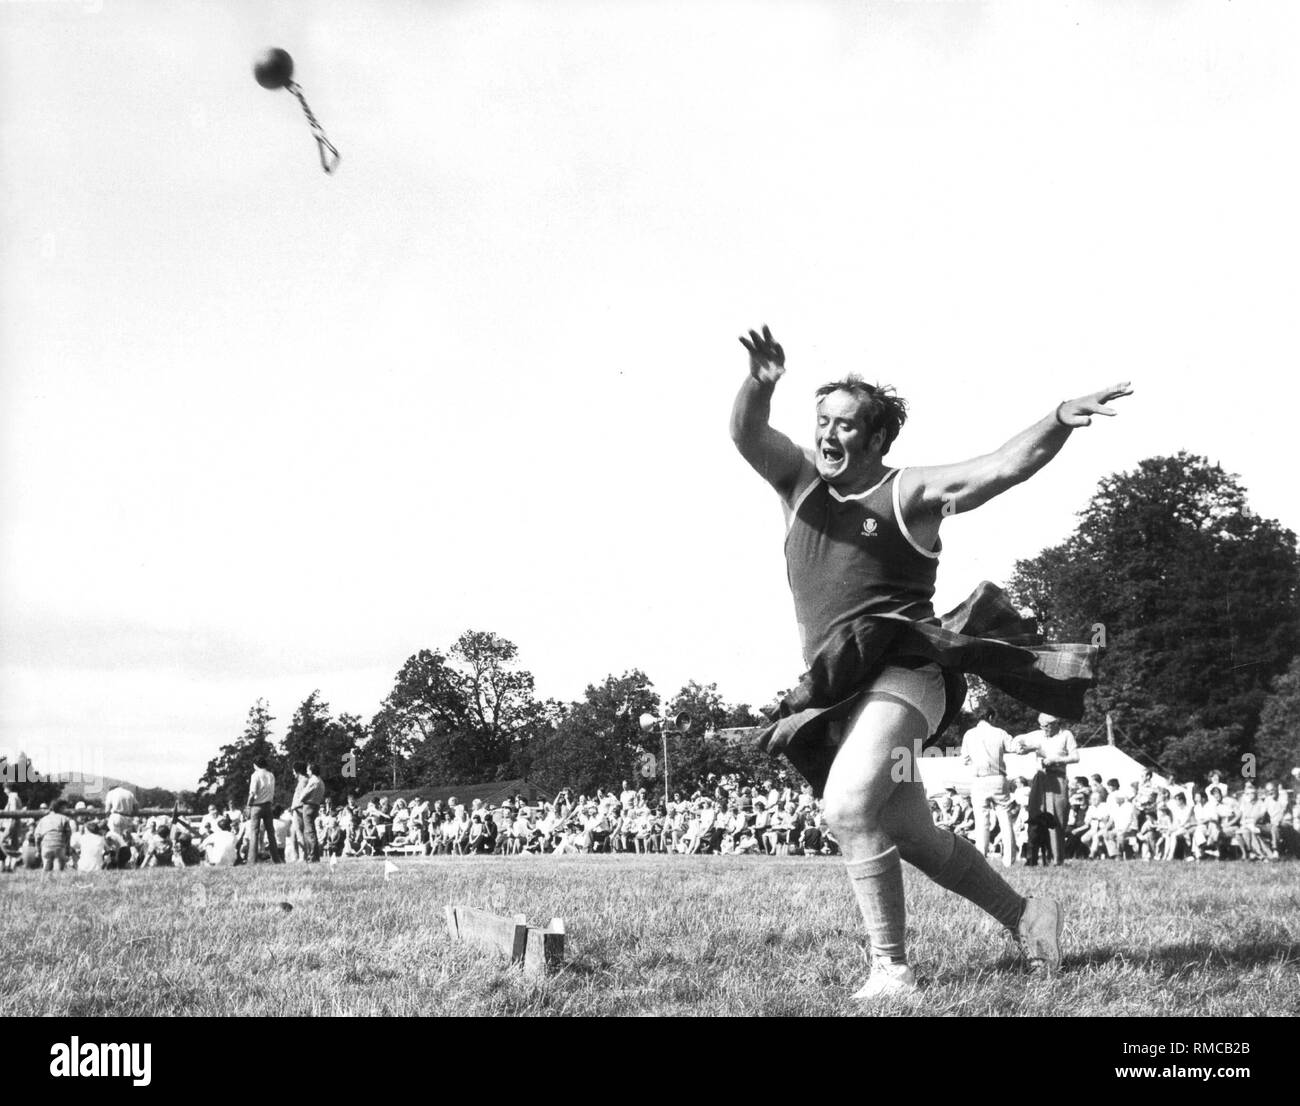 A hammer thrower at the Highland Games in Scotland. Stock Photo